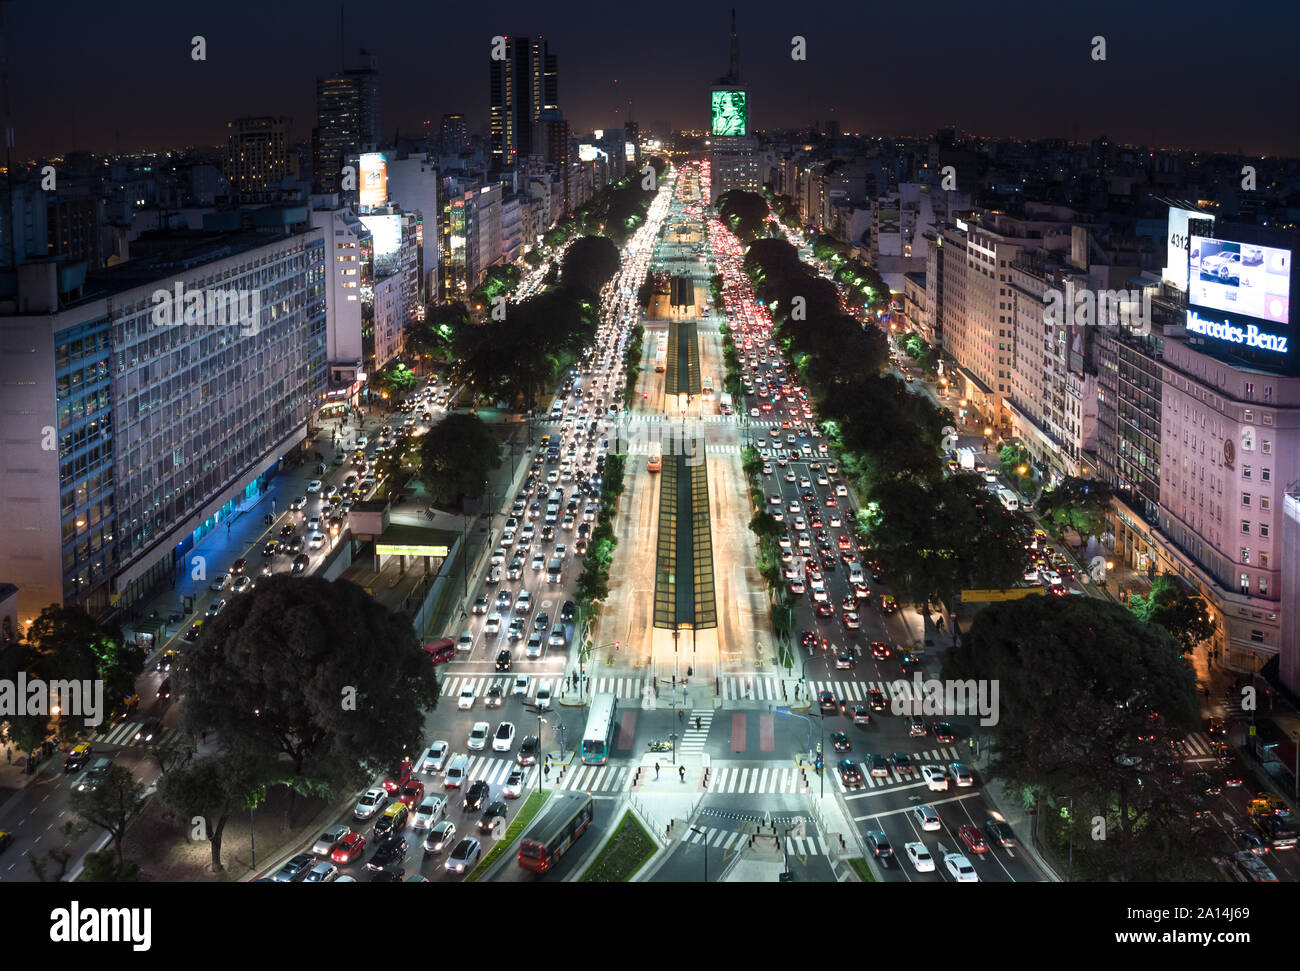 Buenos Aires, Argentina - May 4 2015: Rush hour and traffic on the sreets of Buenos Aires city. This photo shows the 9 de Julio Avenue. Stock Photo